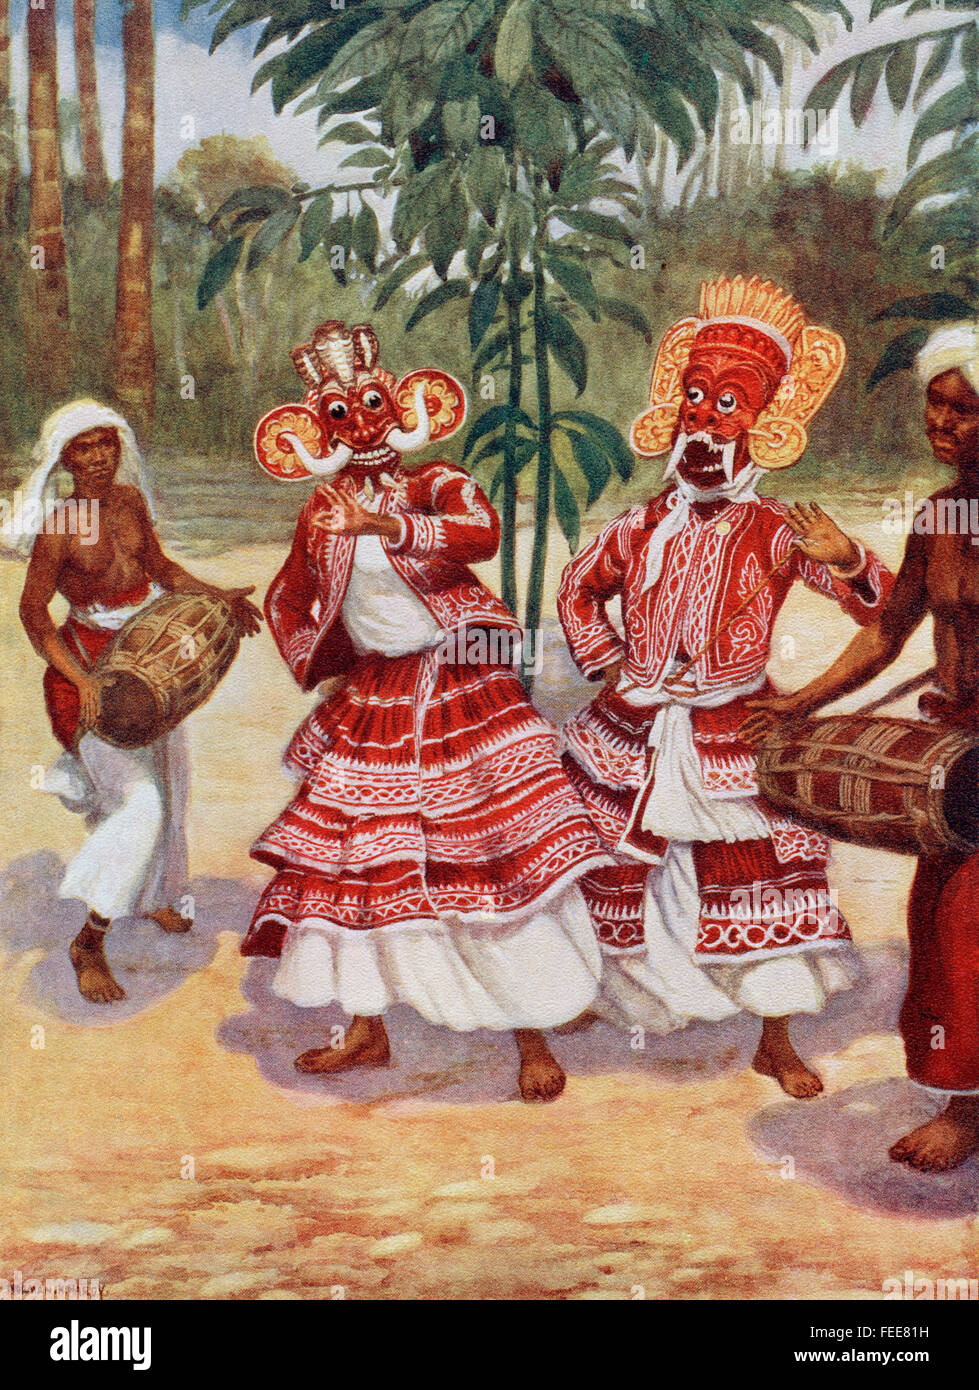 Sinhalese Devil Dancers on the island of Sri Lanka, Asia. The dancers wear masks which represent the demons who are appeased by them in times of sickness. Stock Photo